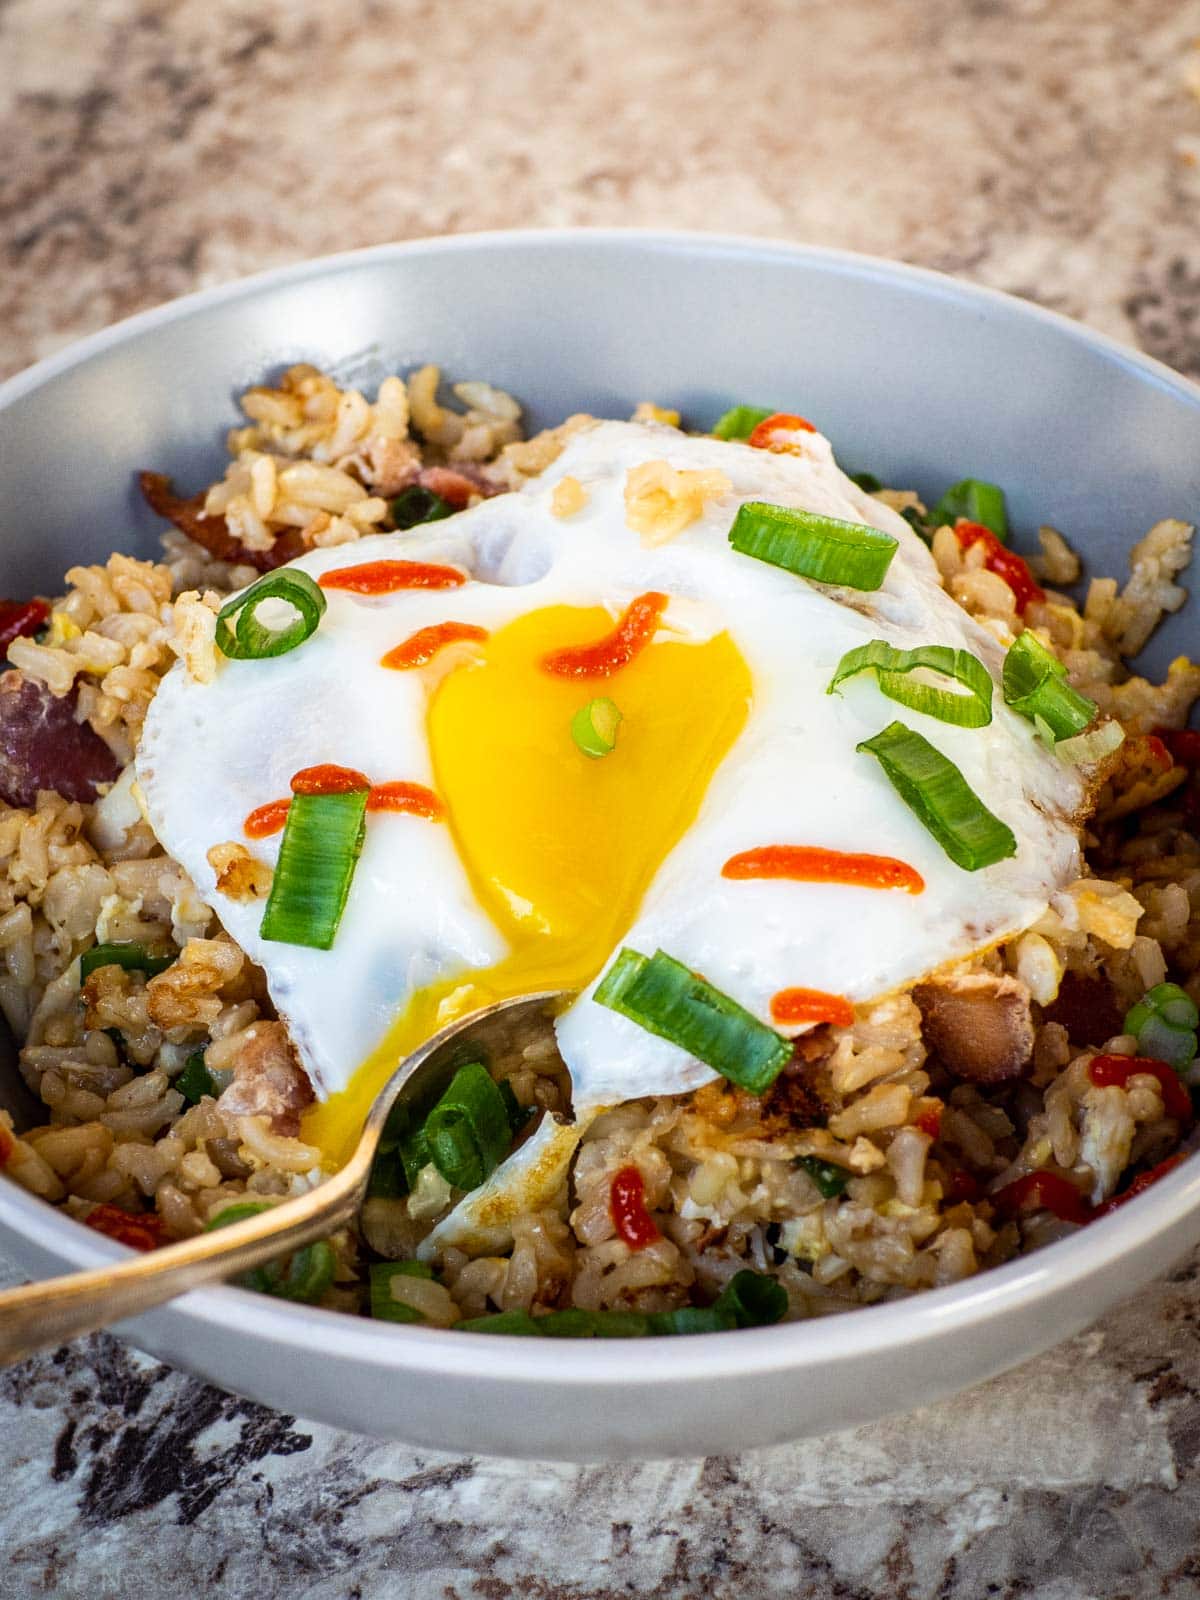 Bowl of breakfast fried rice with an egg on top with a runny yolk.